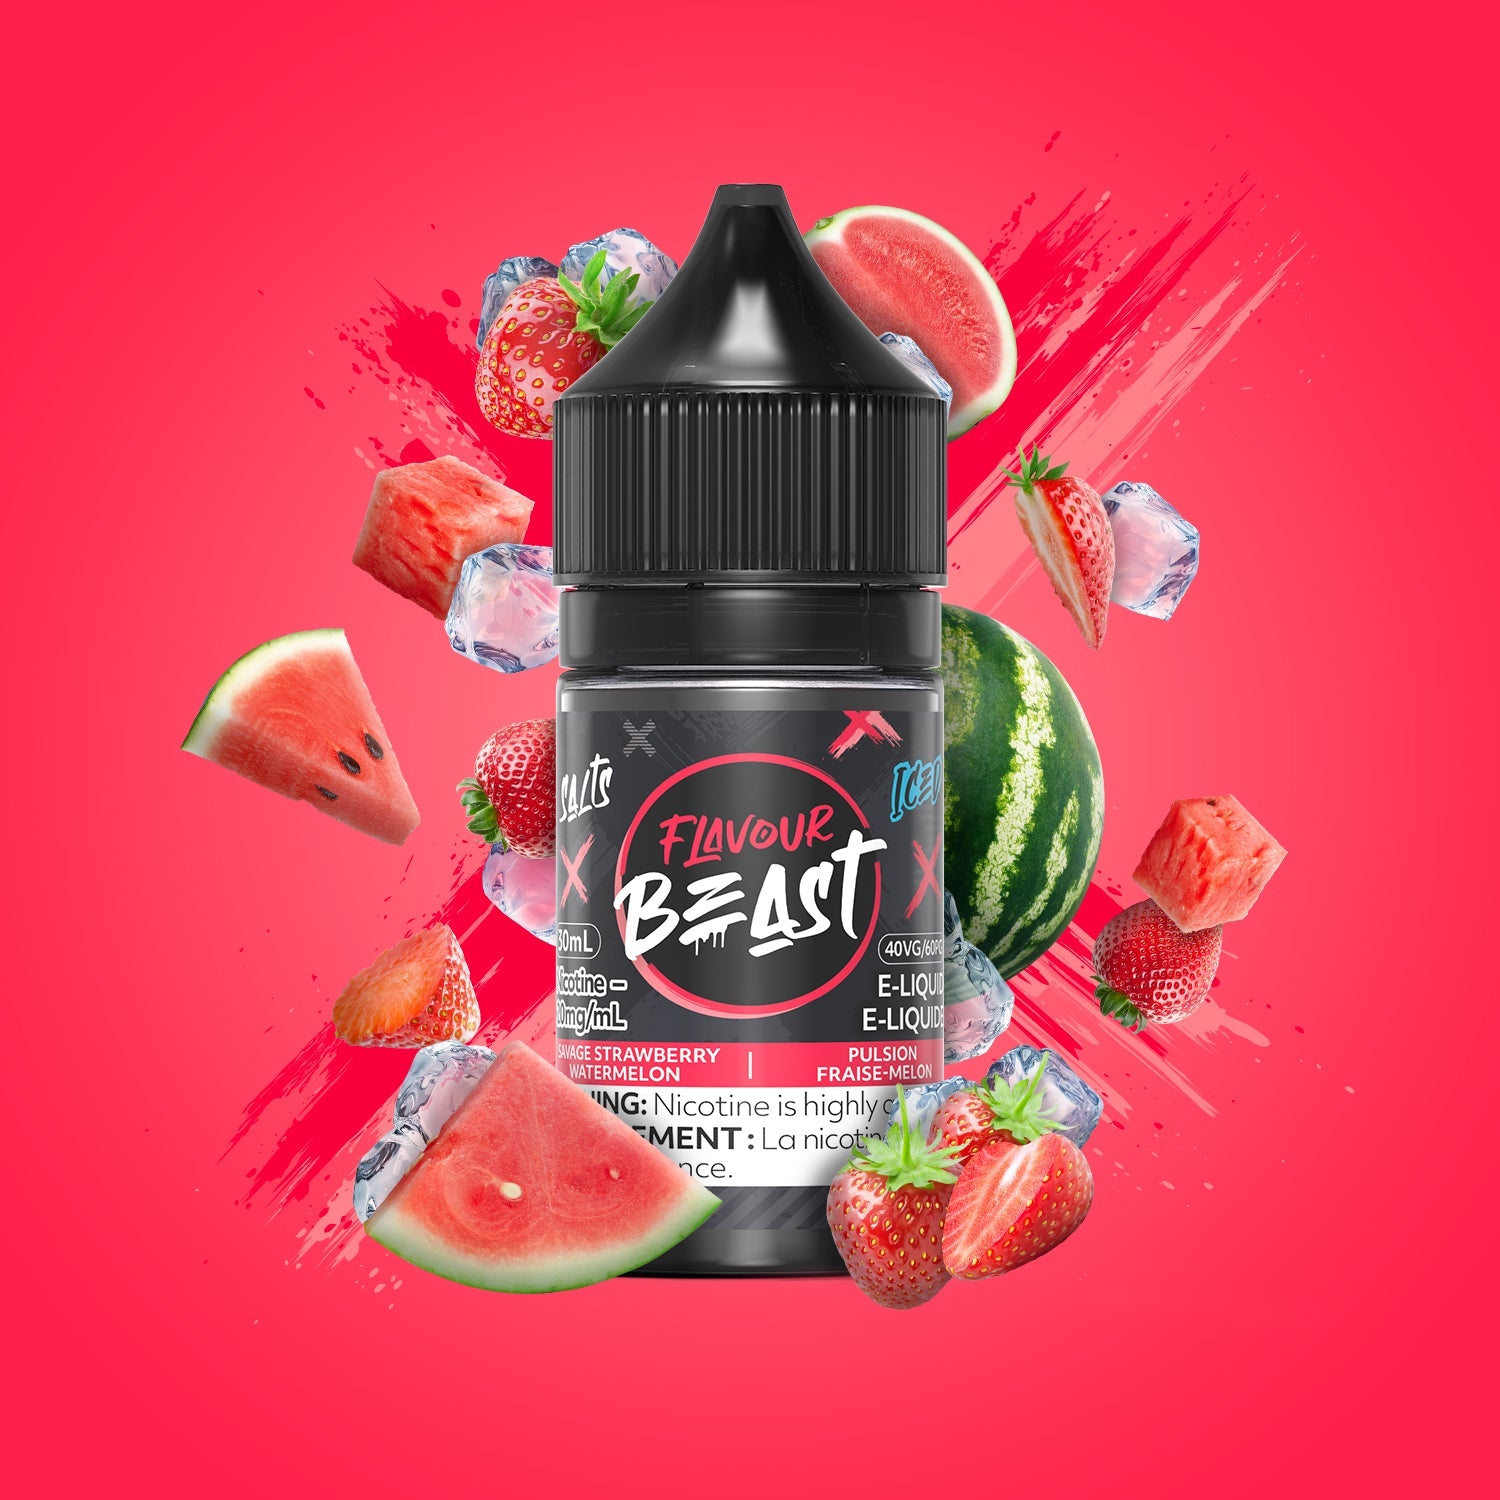 Flavour Beast Salt - Savage Strawberry Watermelon Iced (EXCISE TAXED)